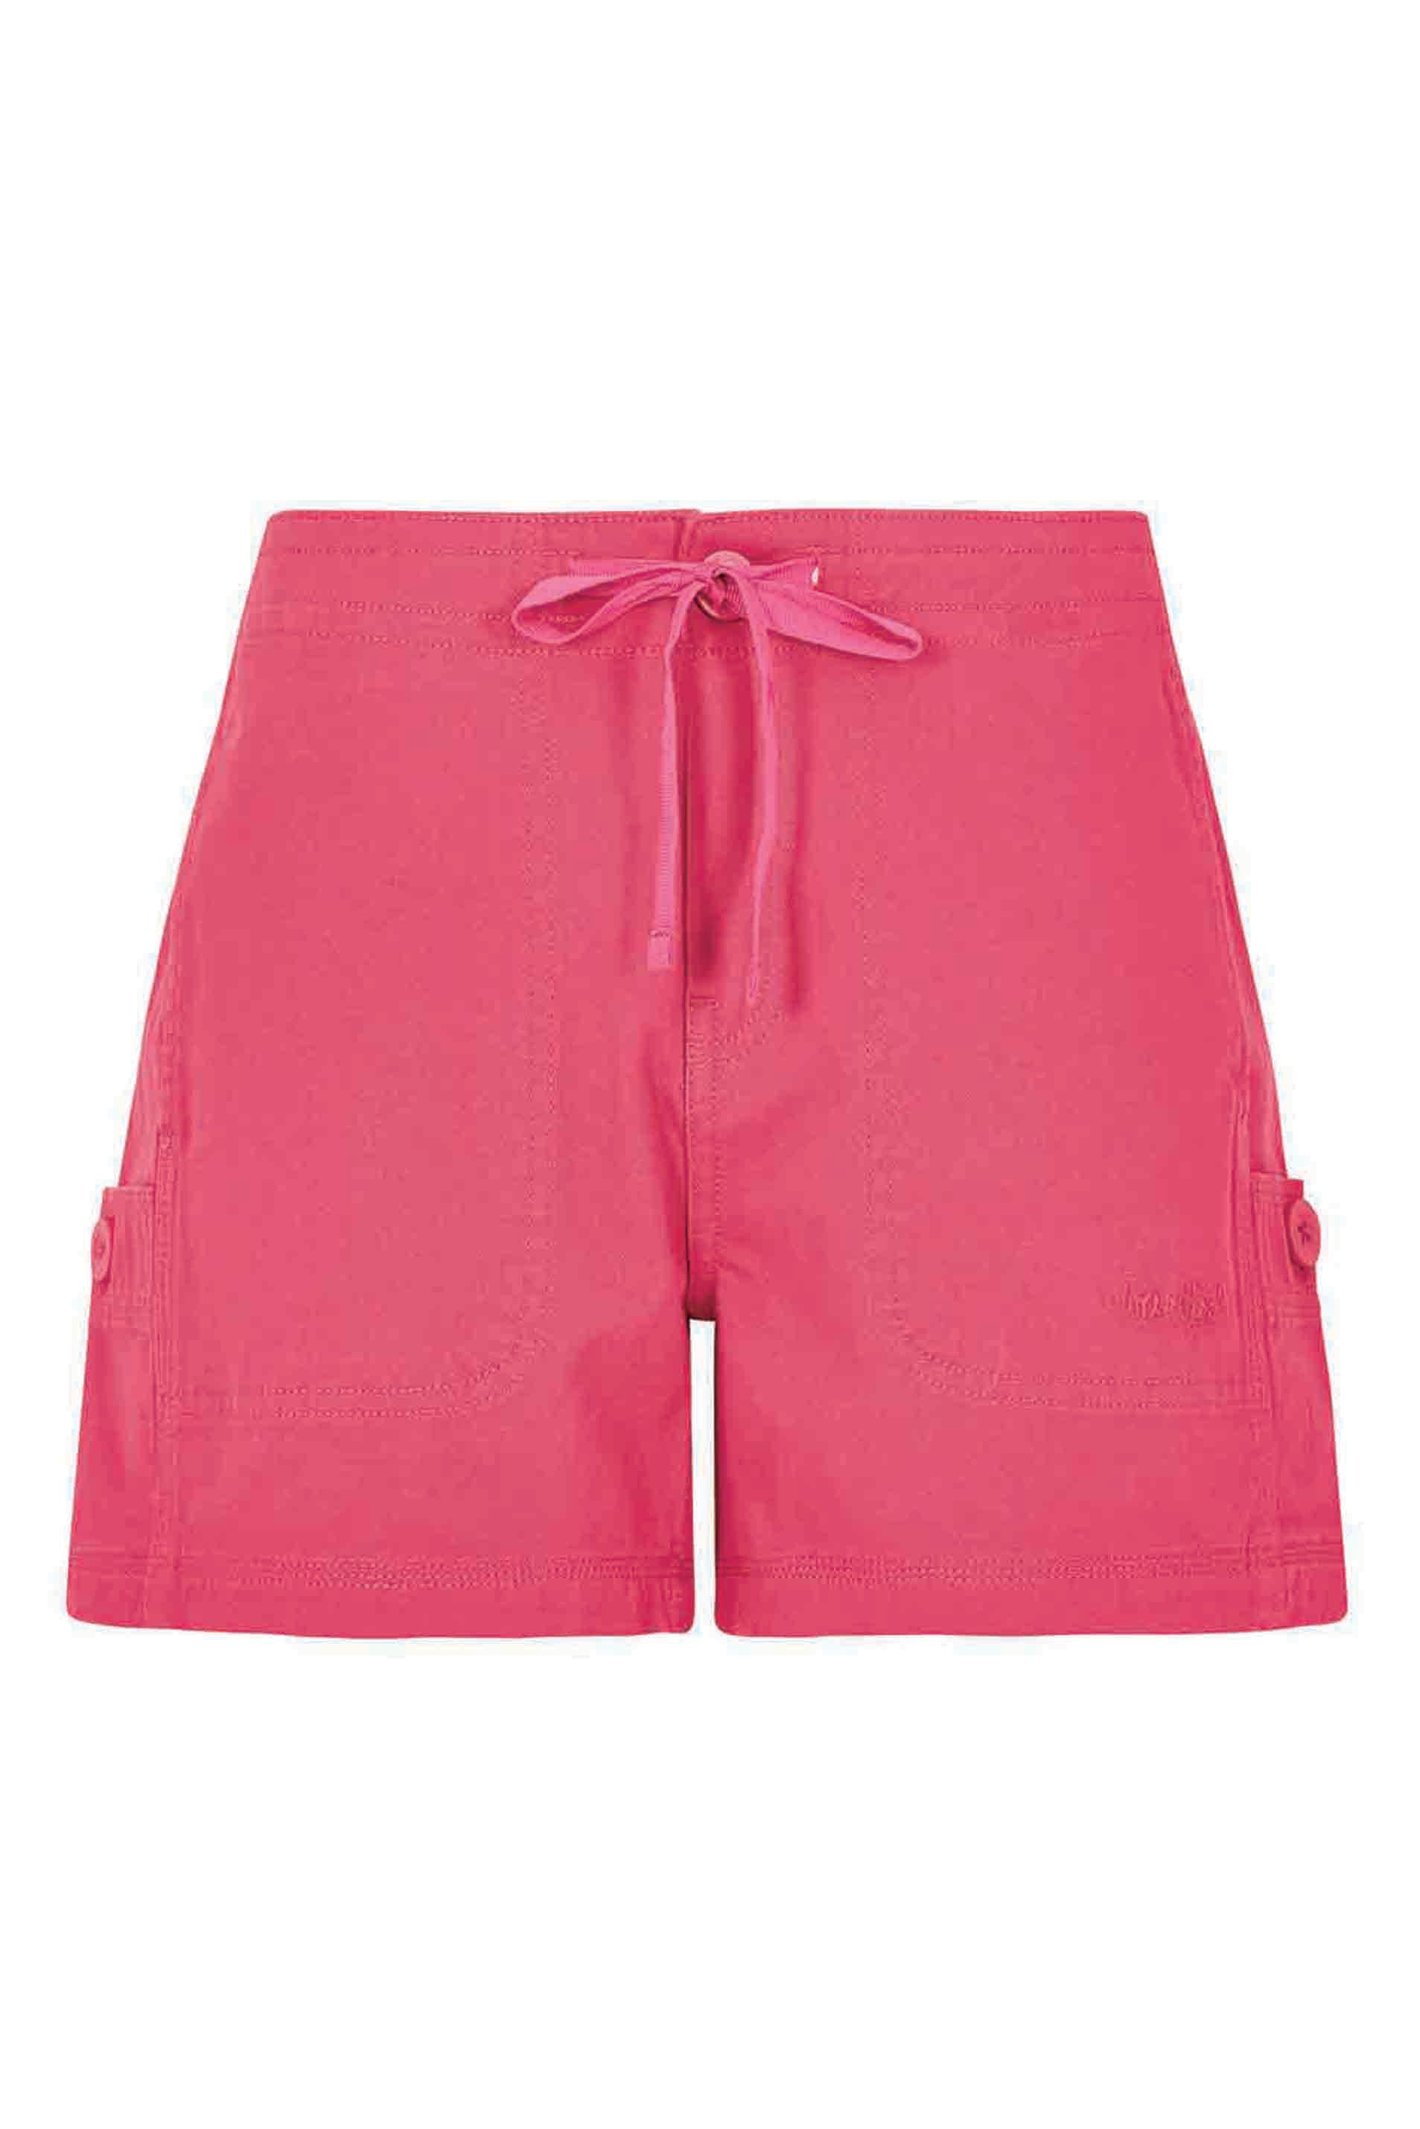 Weird Fish Willoughby Summer Shorts Hot Pink Size 8